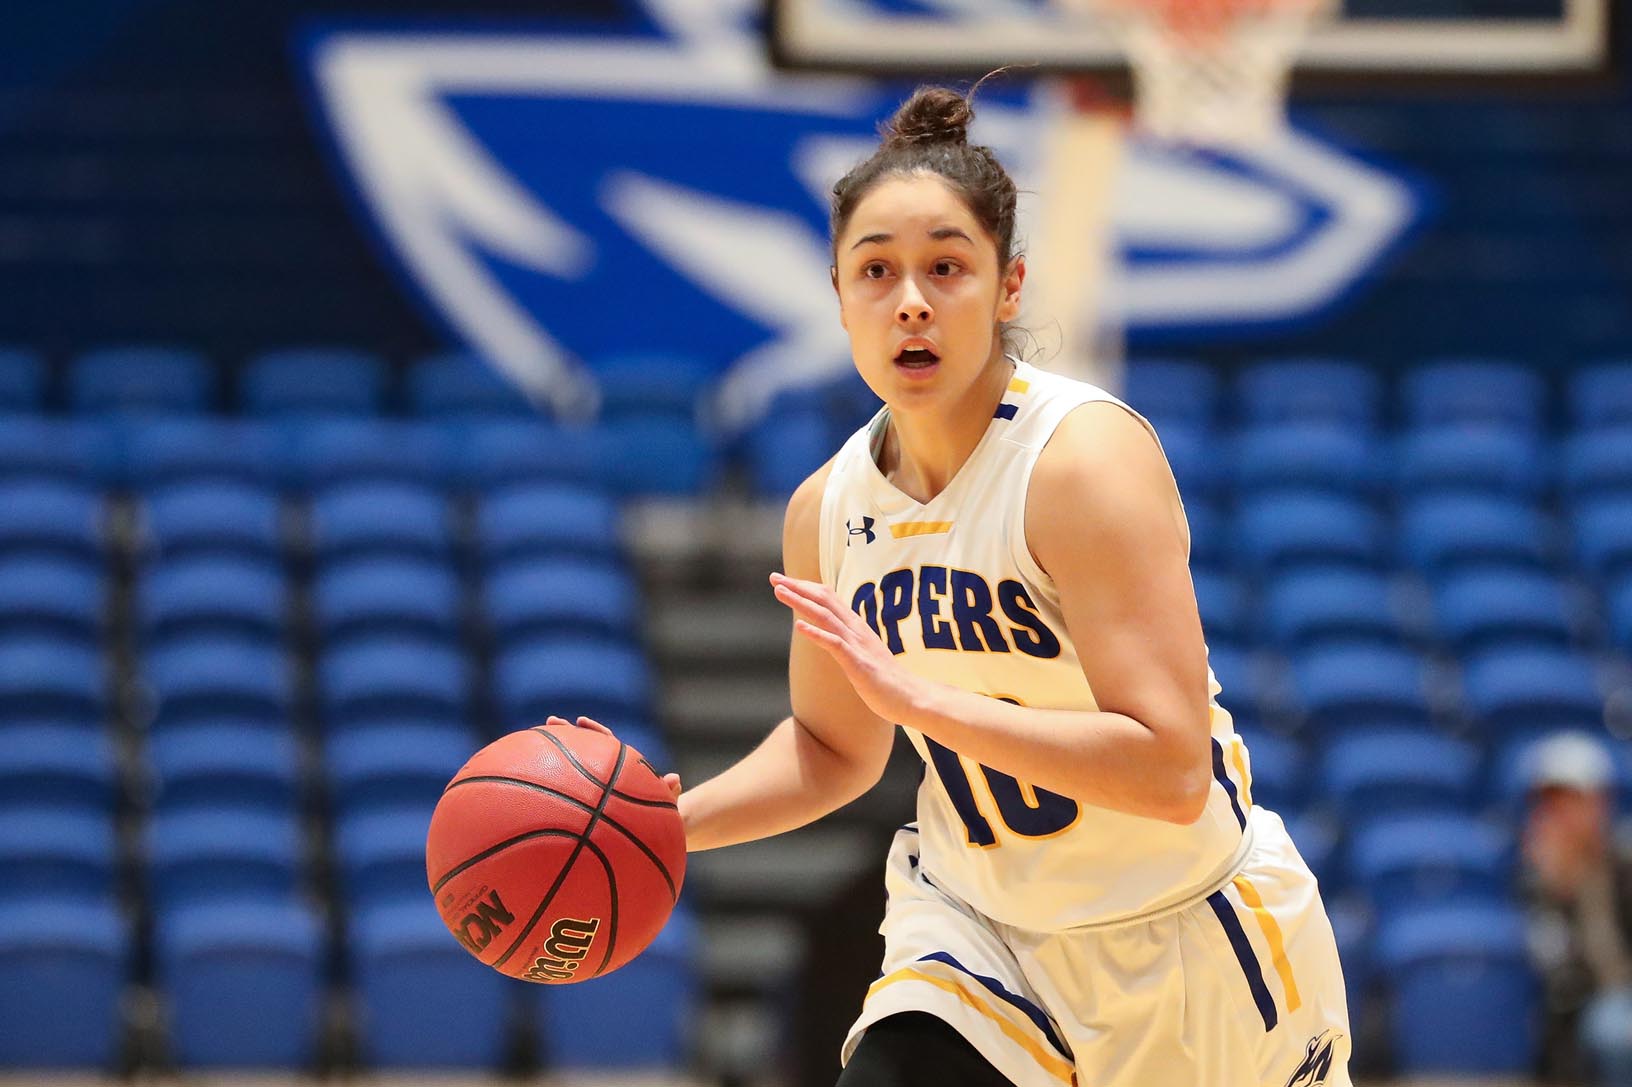 Graduate transfer Haley Simental leads a UNK offense averaging nearly 77 points per game this season. The Lopers are 23-3 overall and second in the Mid-America Intercollegiate Athletics Association with a 12-3 conference record.